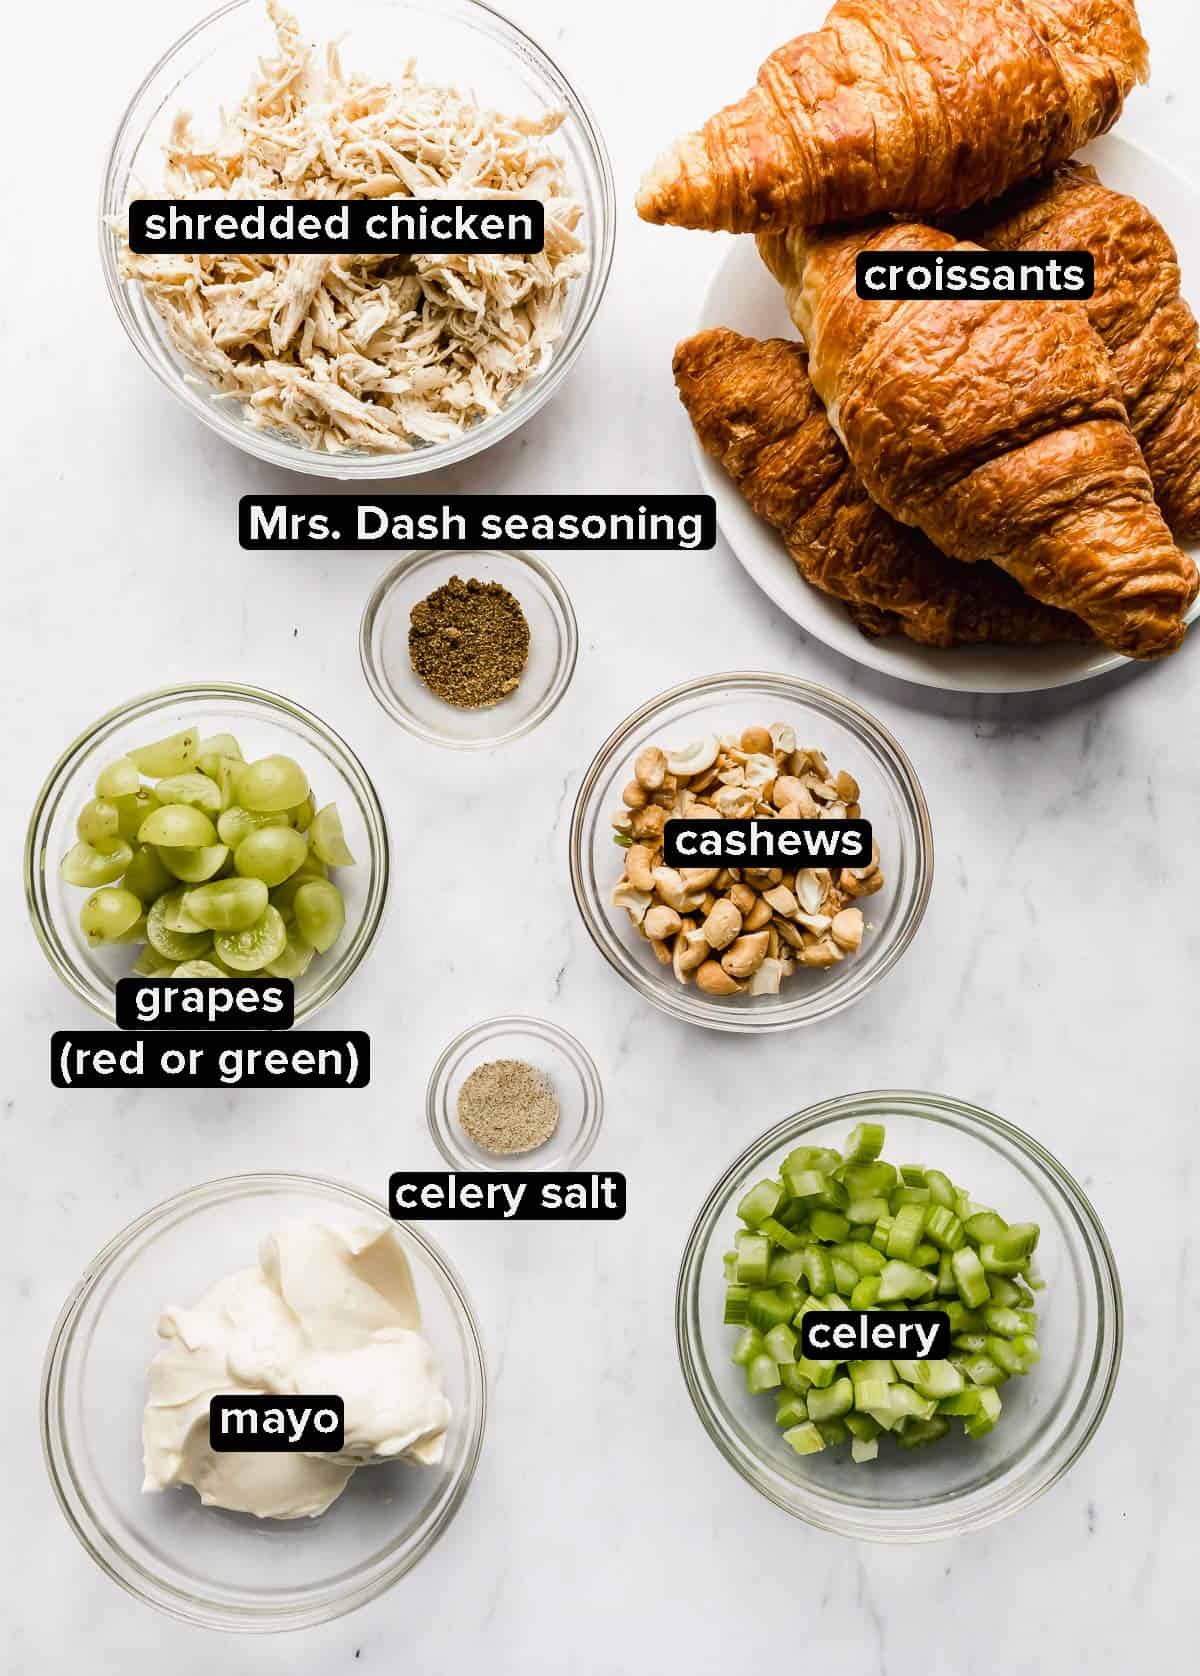 Chicken Salad Sandwich Recipe ingredients in glass bowls on a white marble background.